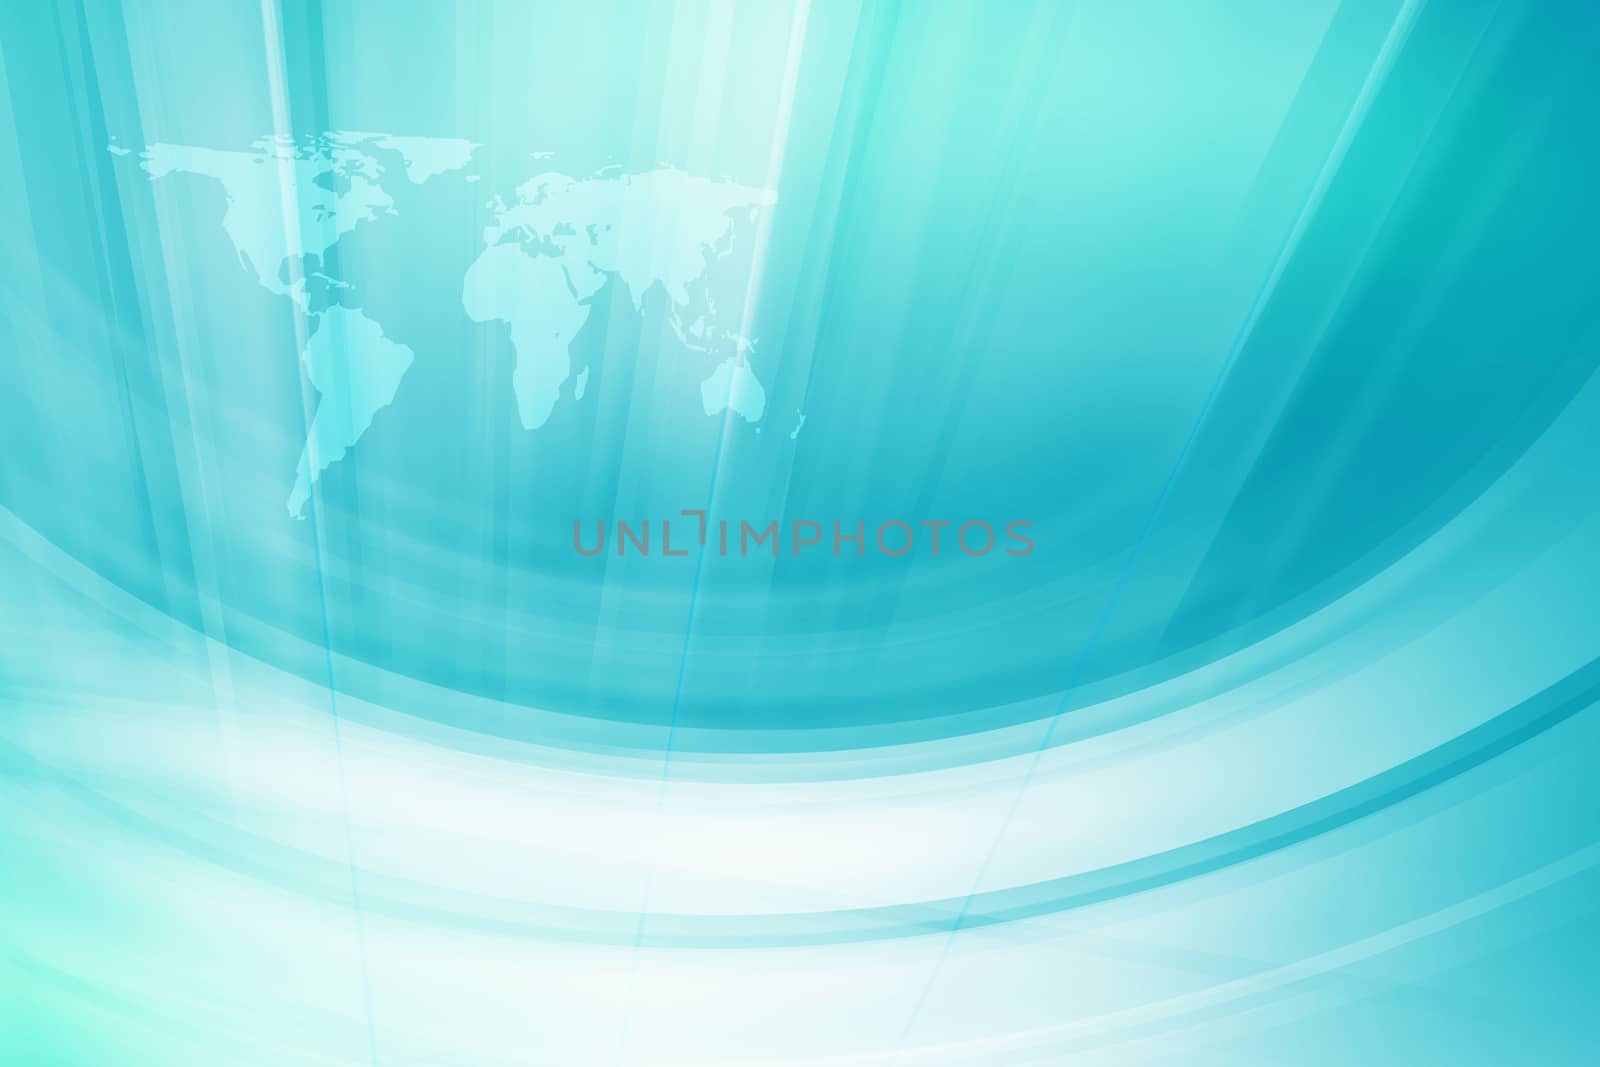 Abstract  Blue Theme Background whit White Curves and World Map  by bluemoon1981